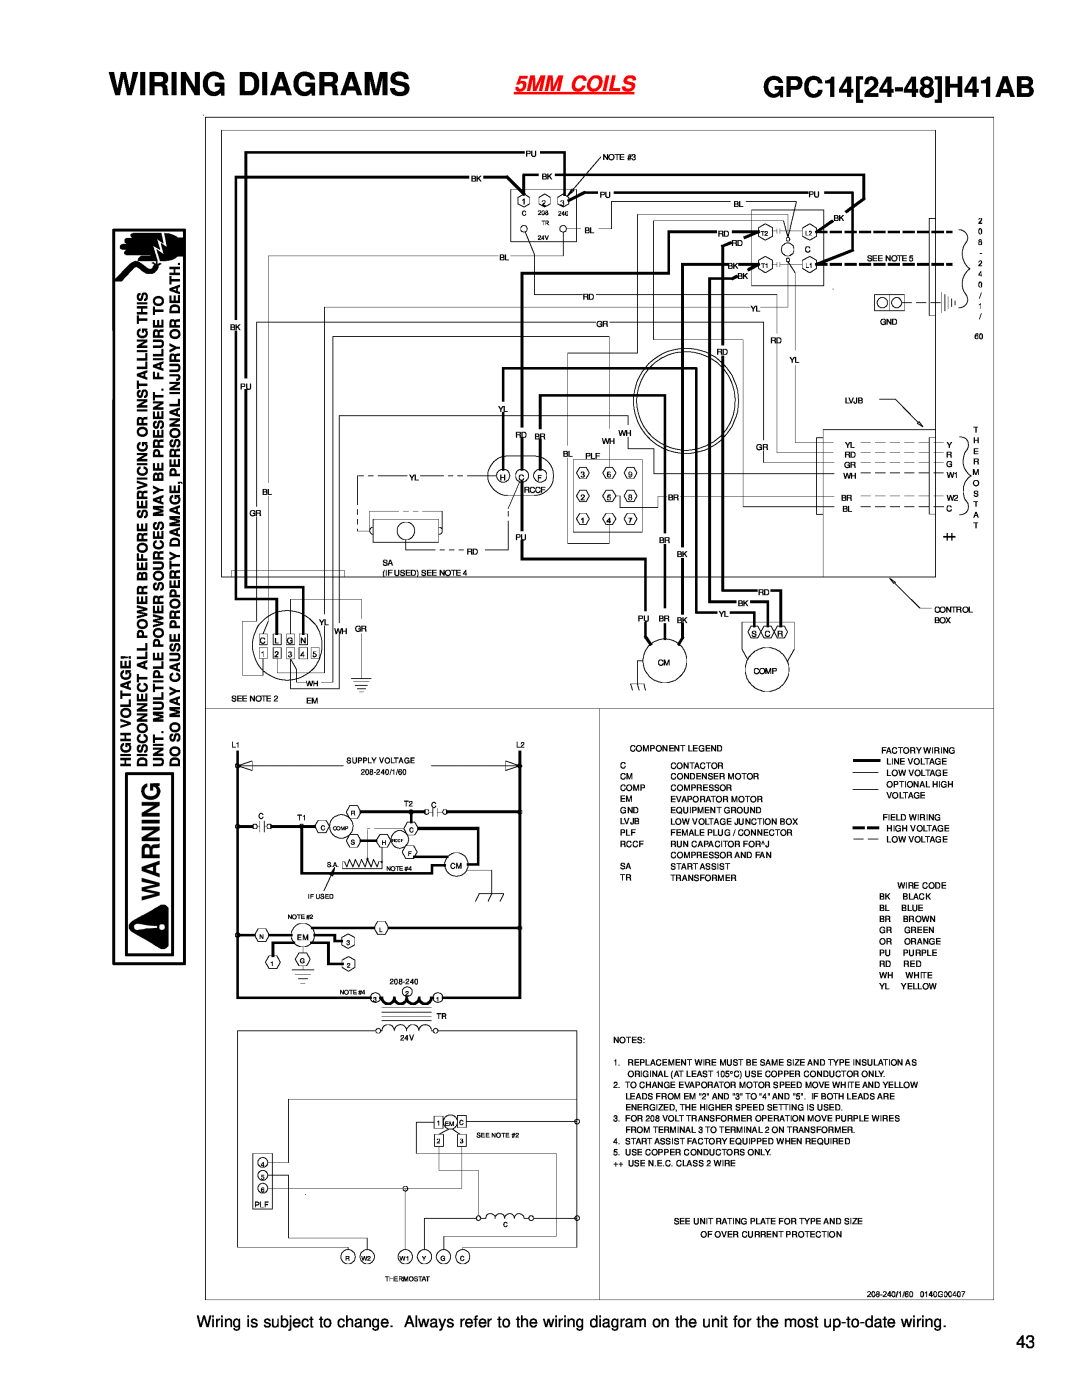 Goodman Mfg GPC 14 SEER R-410 Package Air Conditioners with R-410A, RS6300011 5MM COILS, Wiring Diagrams, GPC1424-48H41AB 